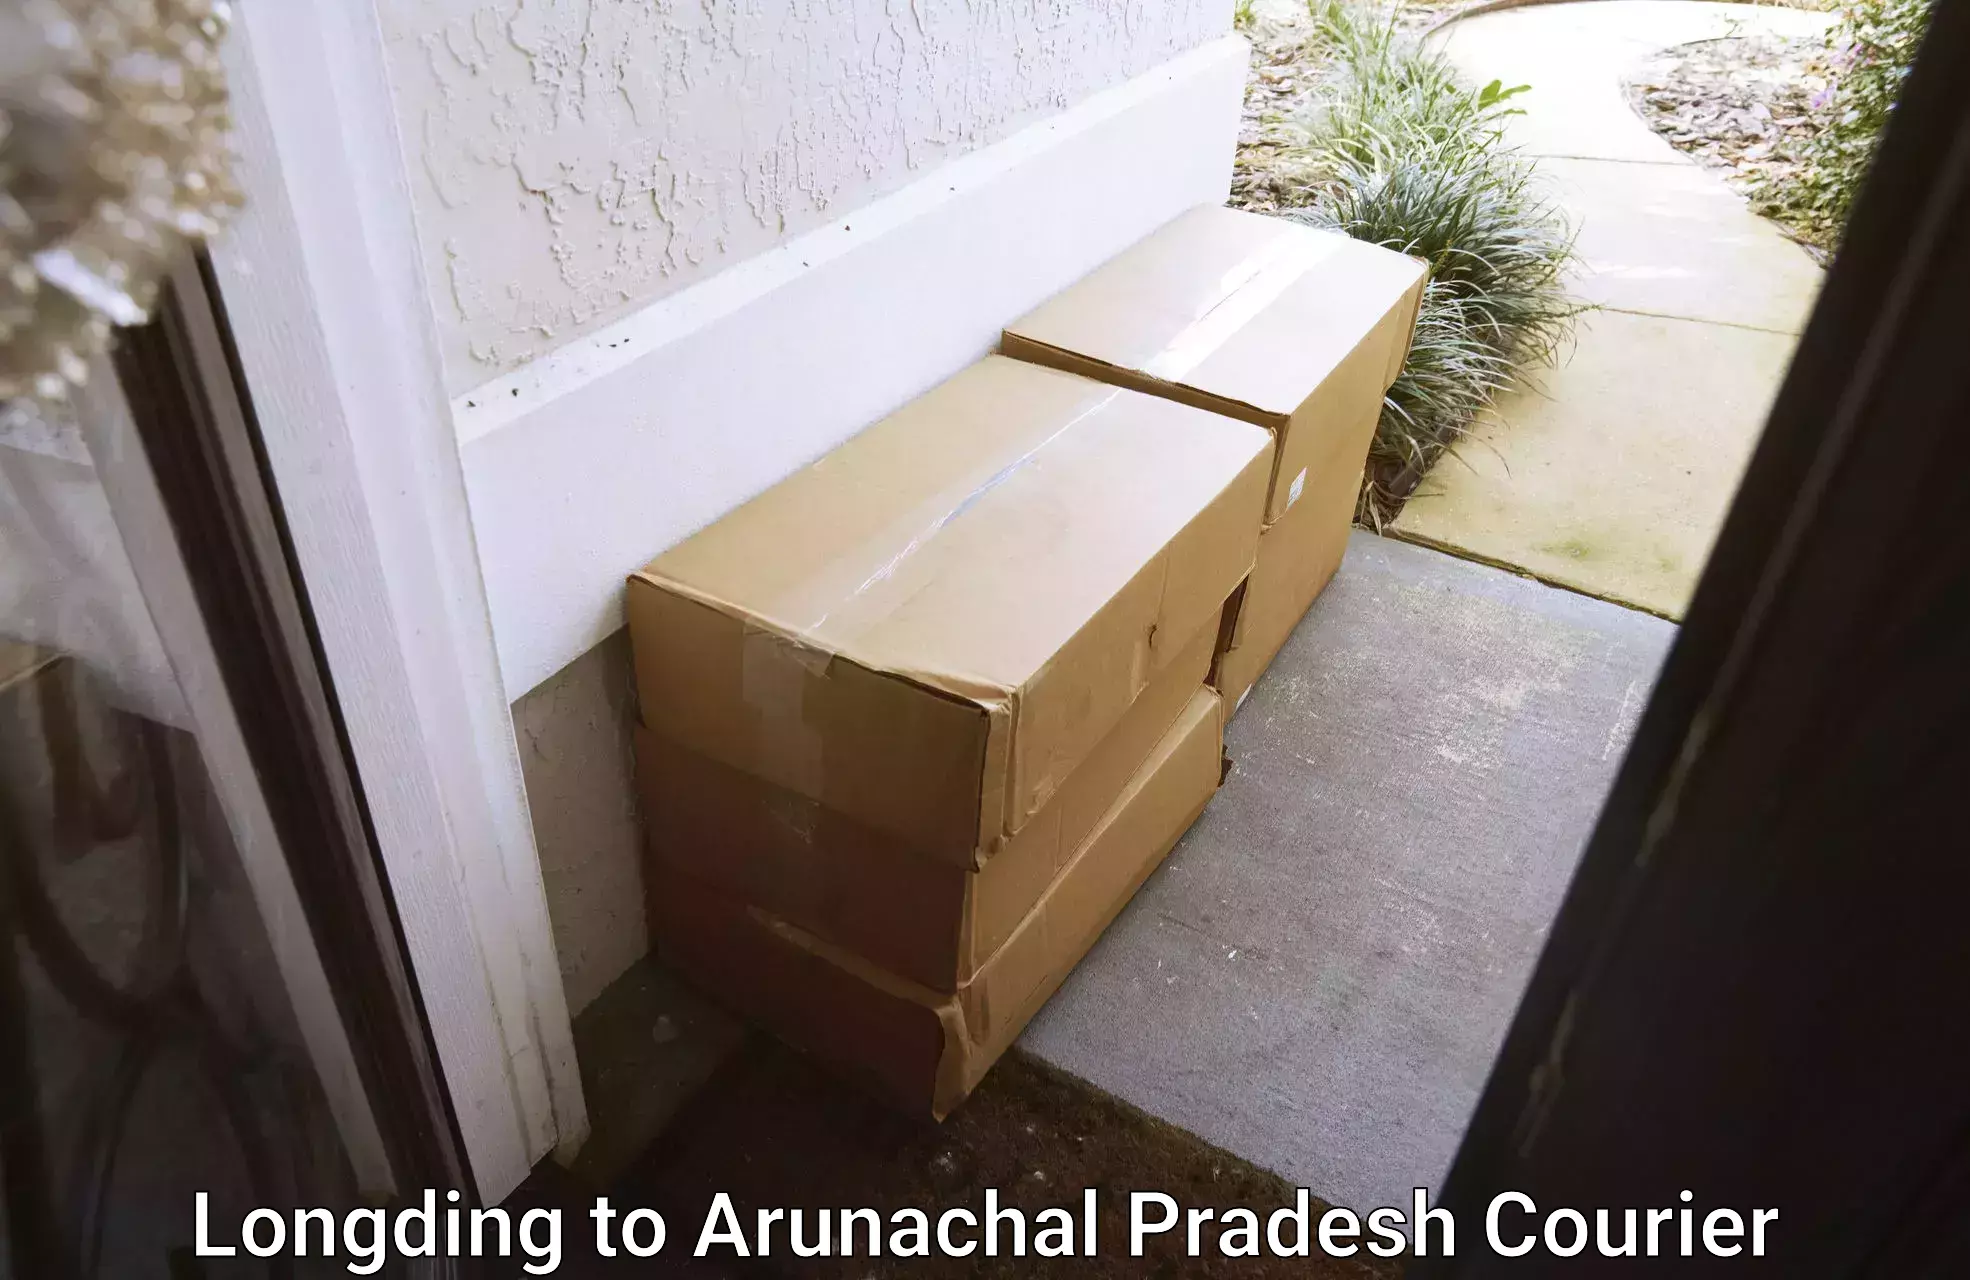 Small business couriers Longding to Arunachal Pradesh